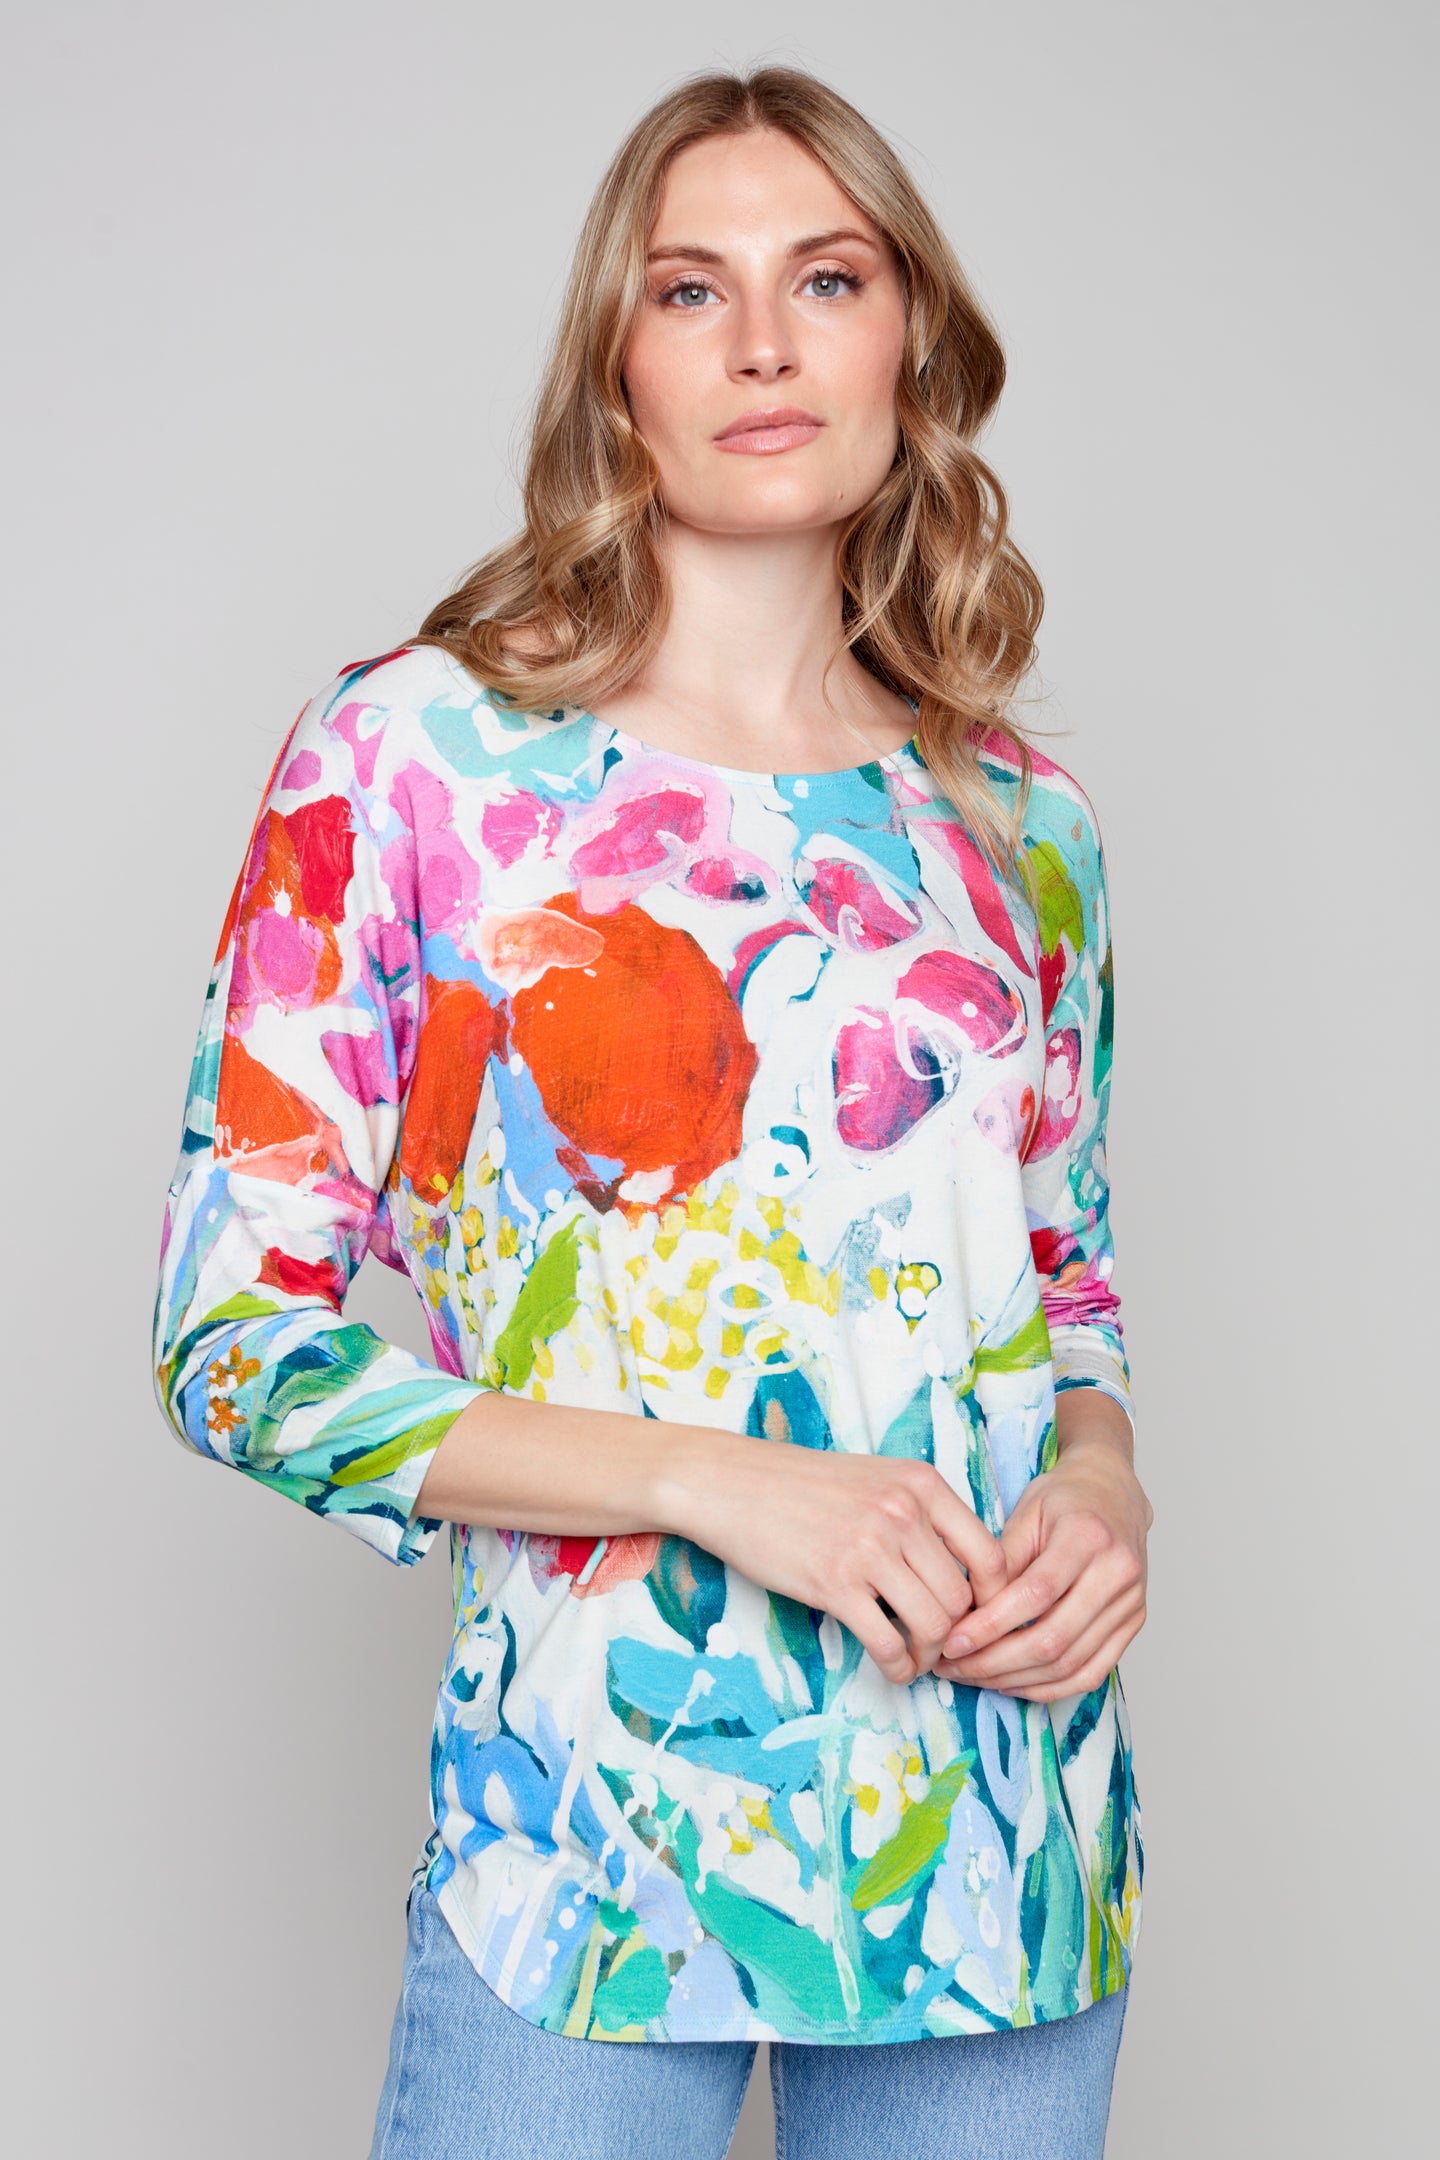 At Liberty in the Garden 3/4-length sleeve top